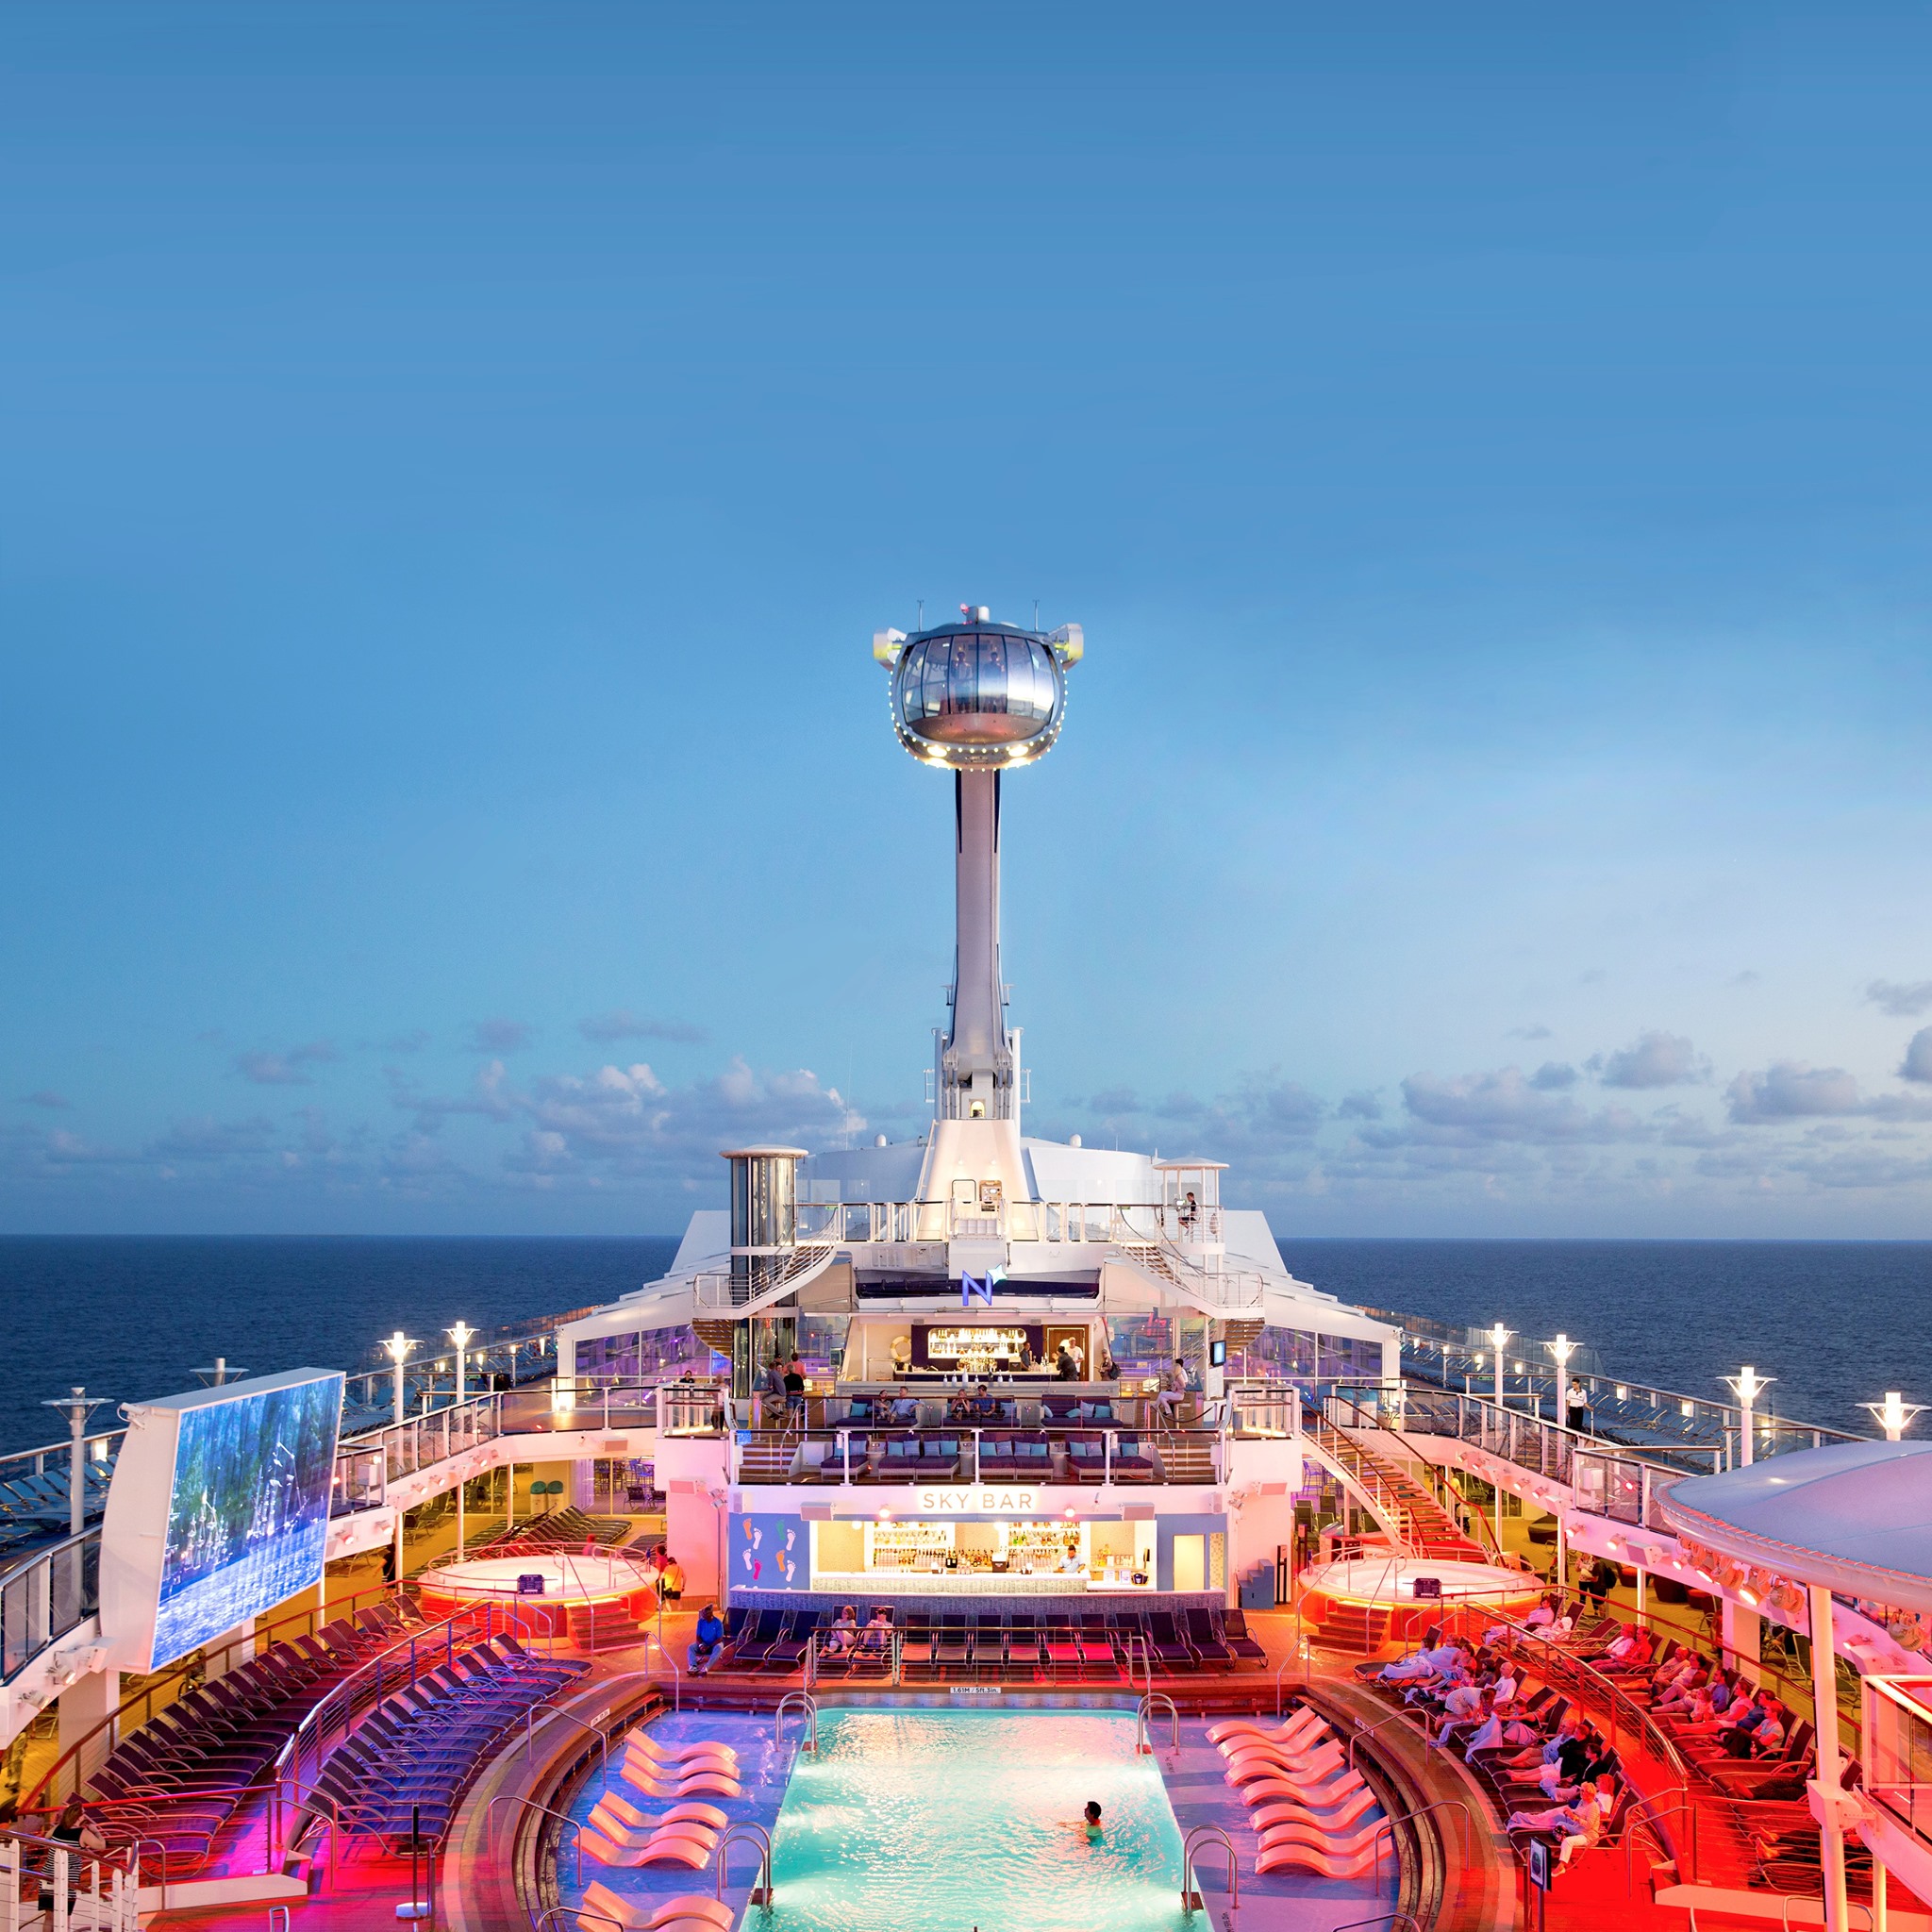 royal caribbean cruise line up 9 tips for your next royal caribbean
cruise